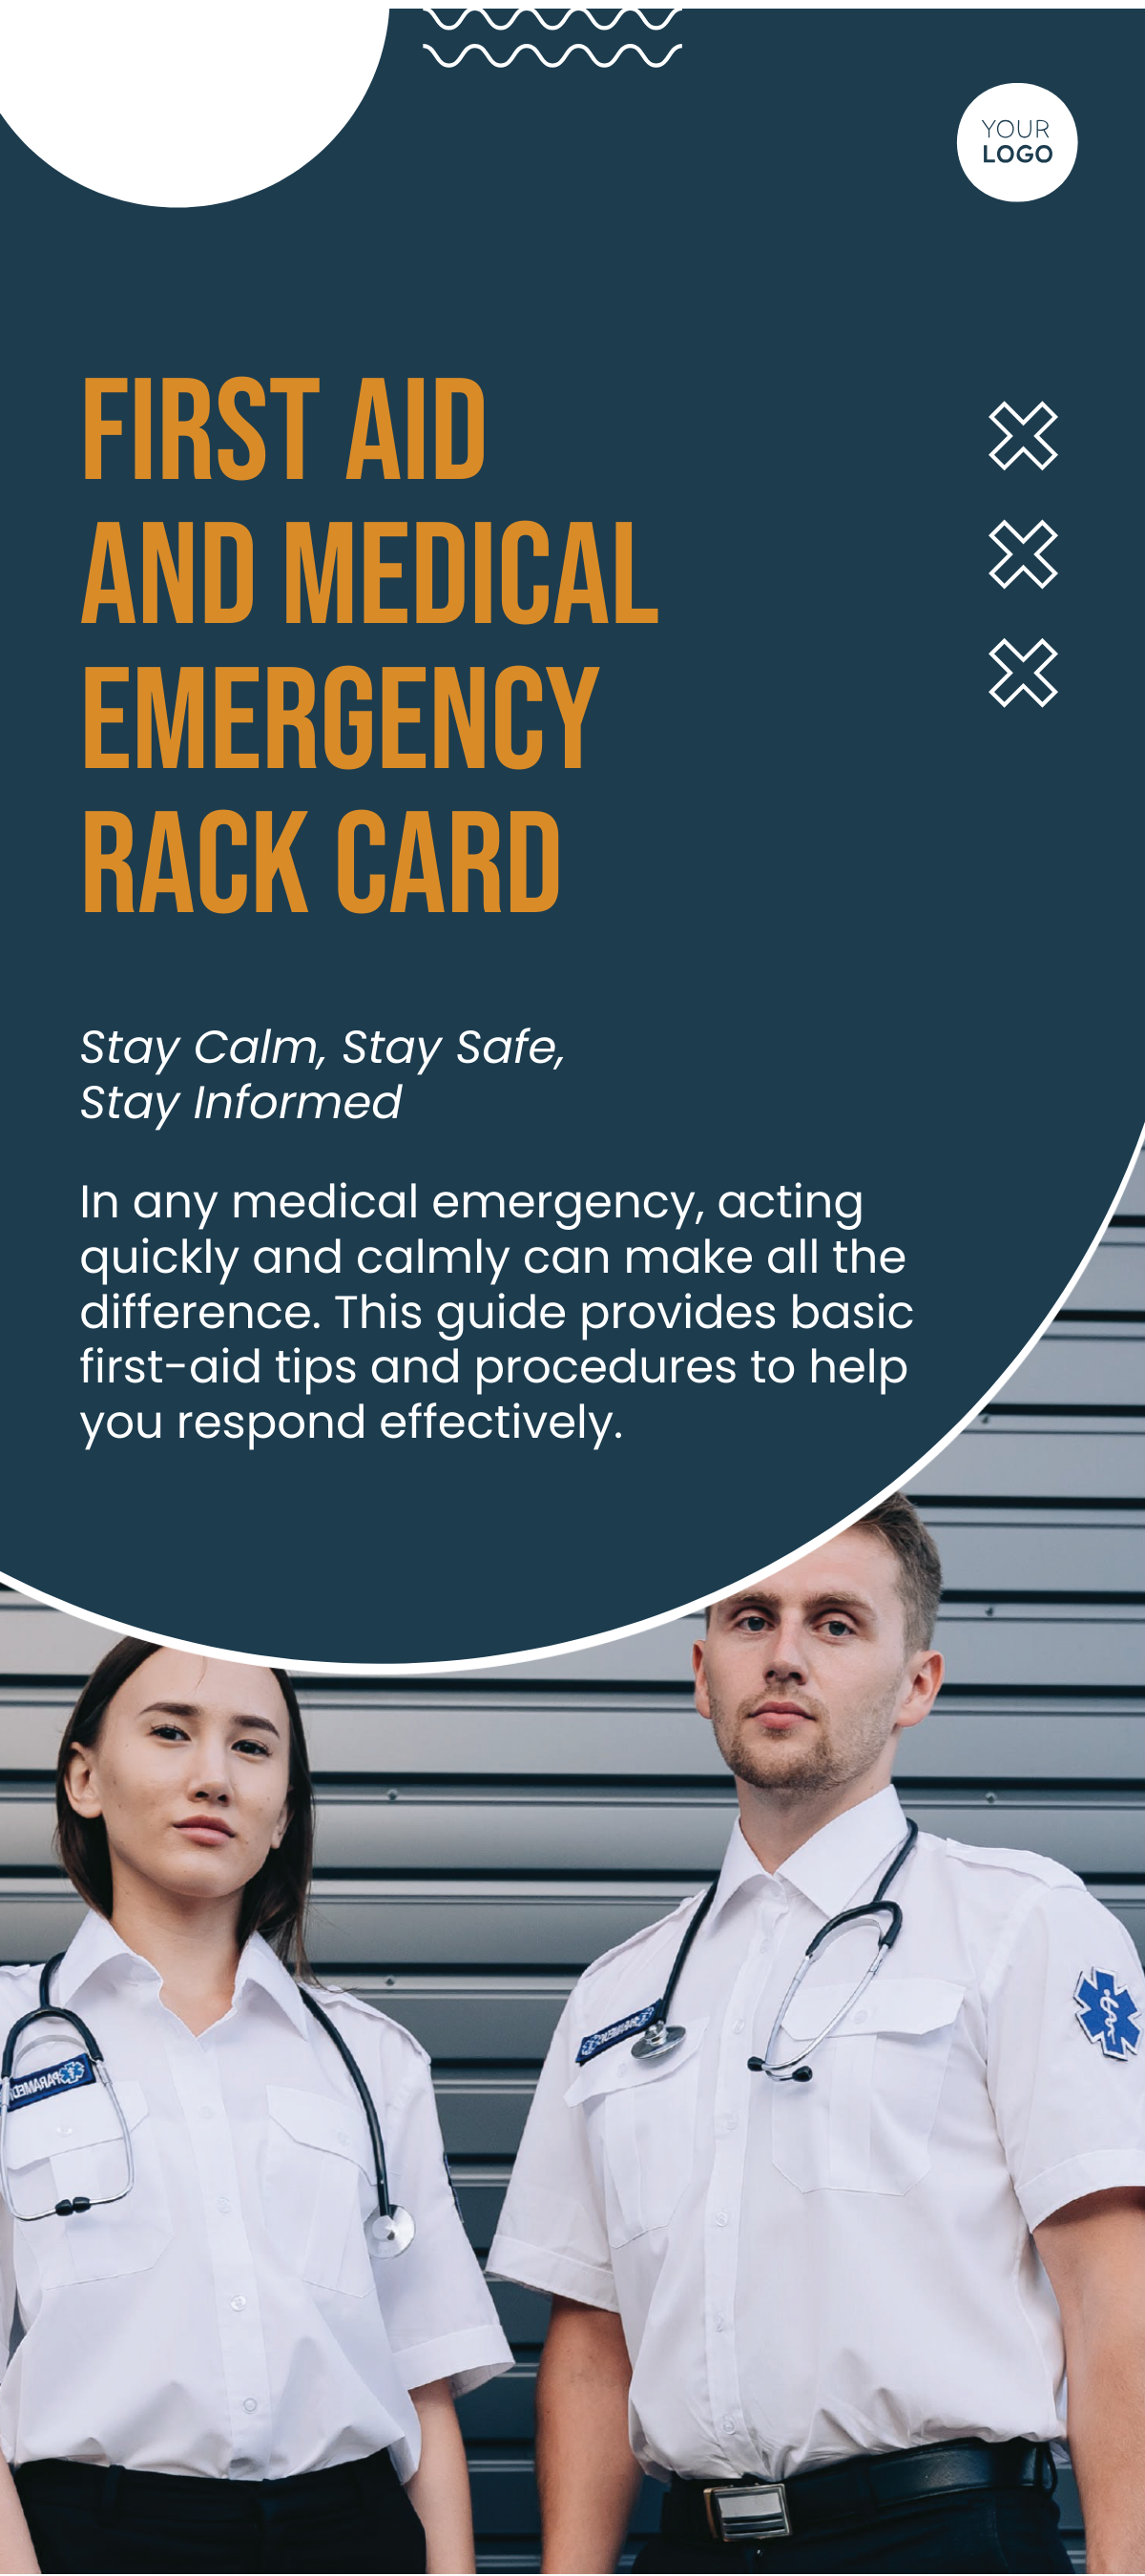 First Aid and Medical Emergency Rack Card Template